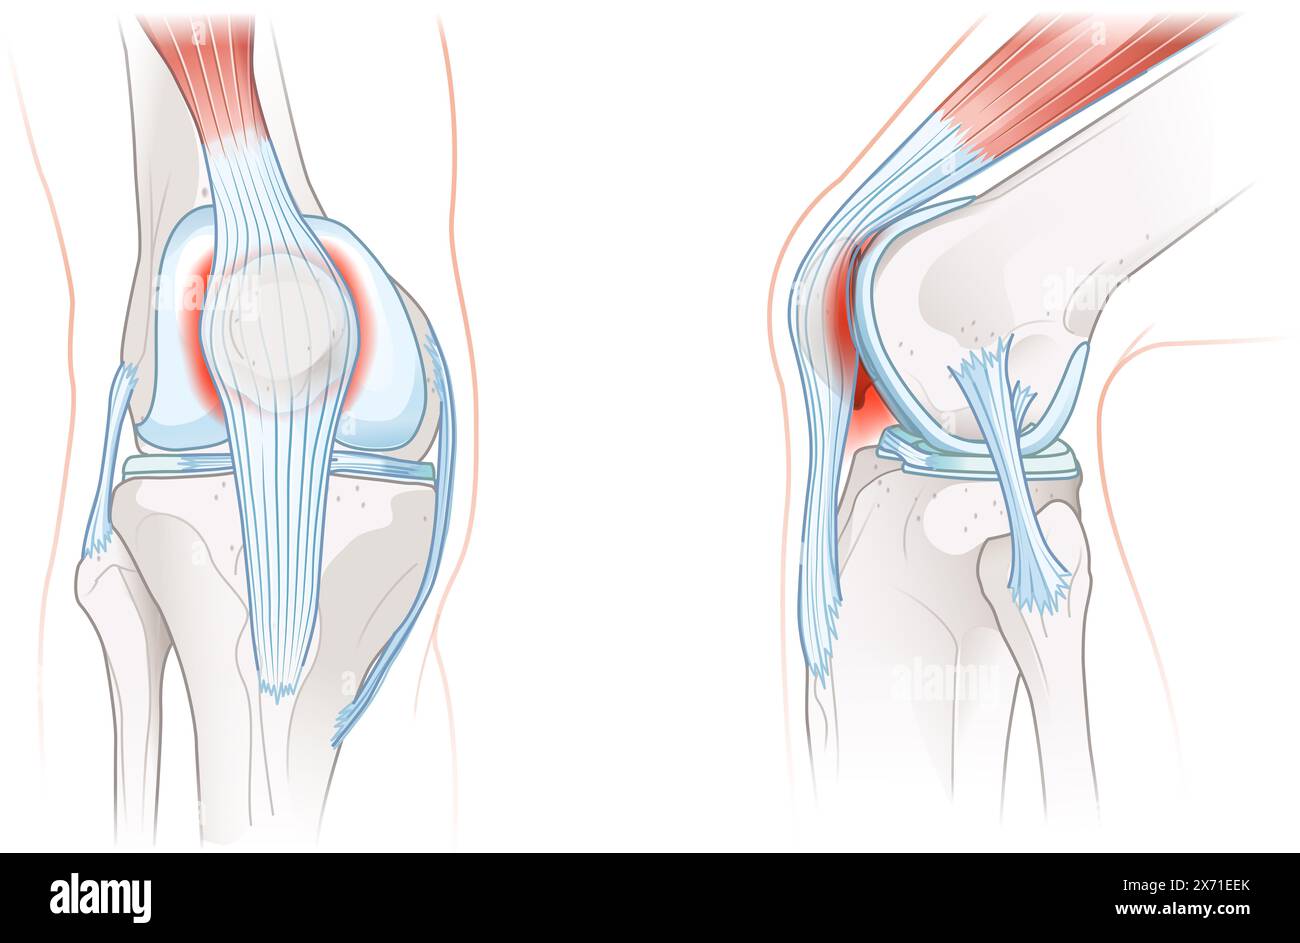 Patellofemoral pain syndrome involves knee discomfort due to malalignment, inflammation, and dysfunction of the patellofemoral joint during movement. Stock Photo